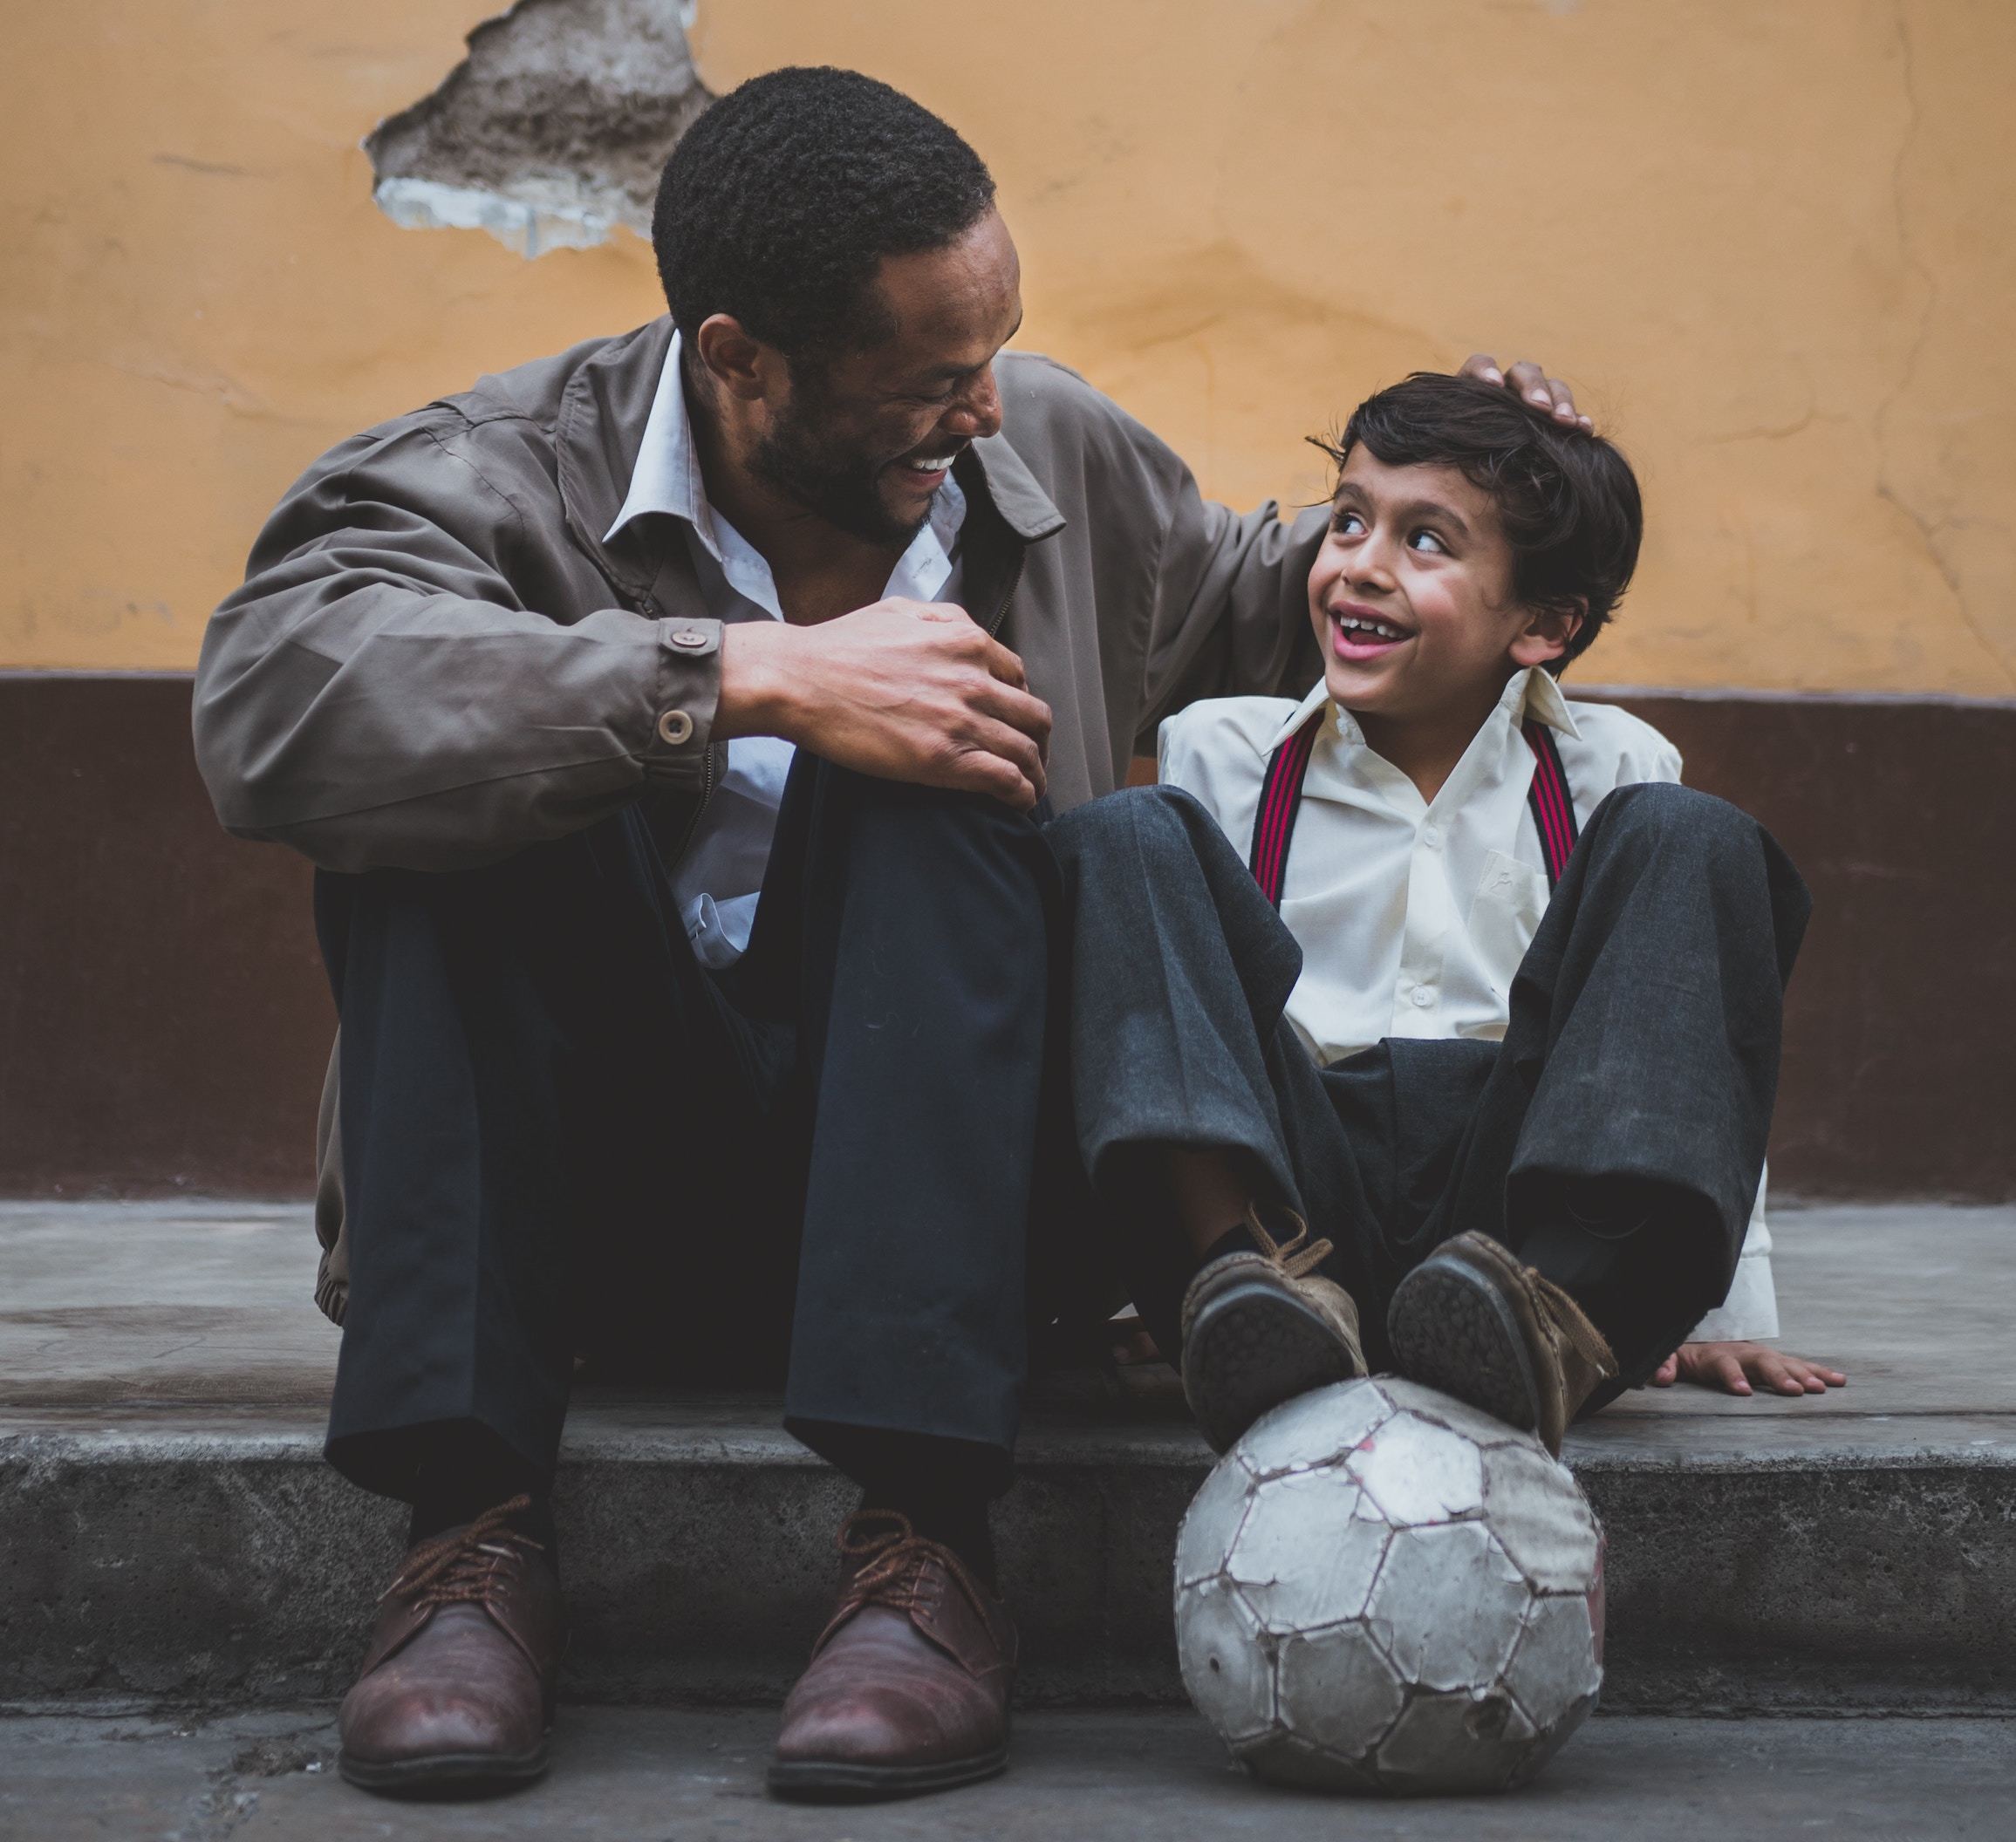 Father and son with soccer ball